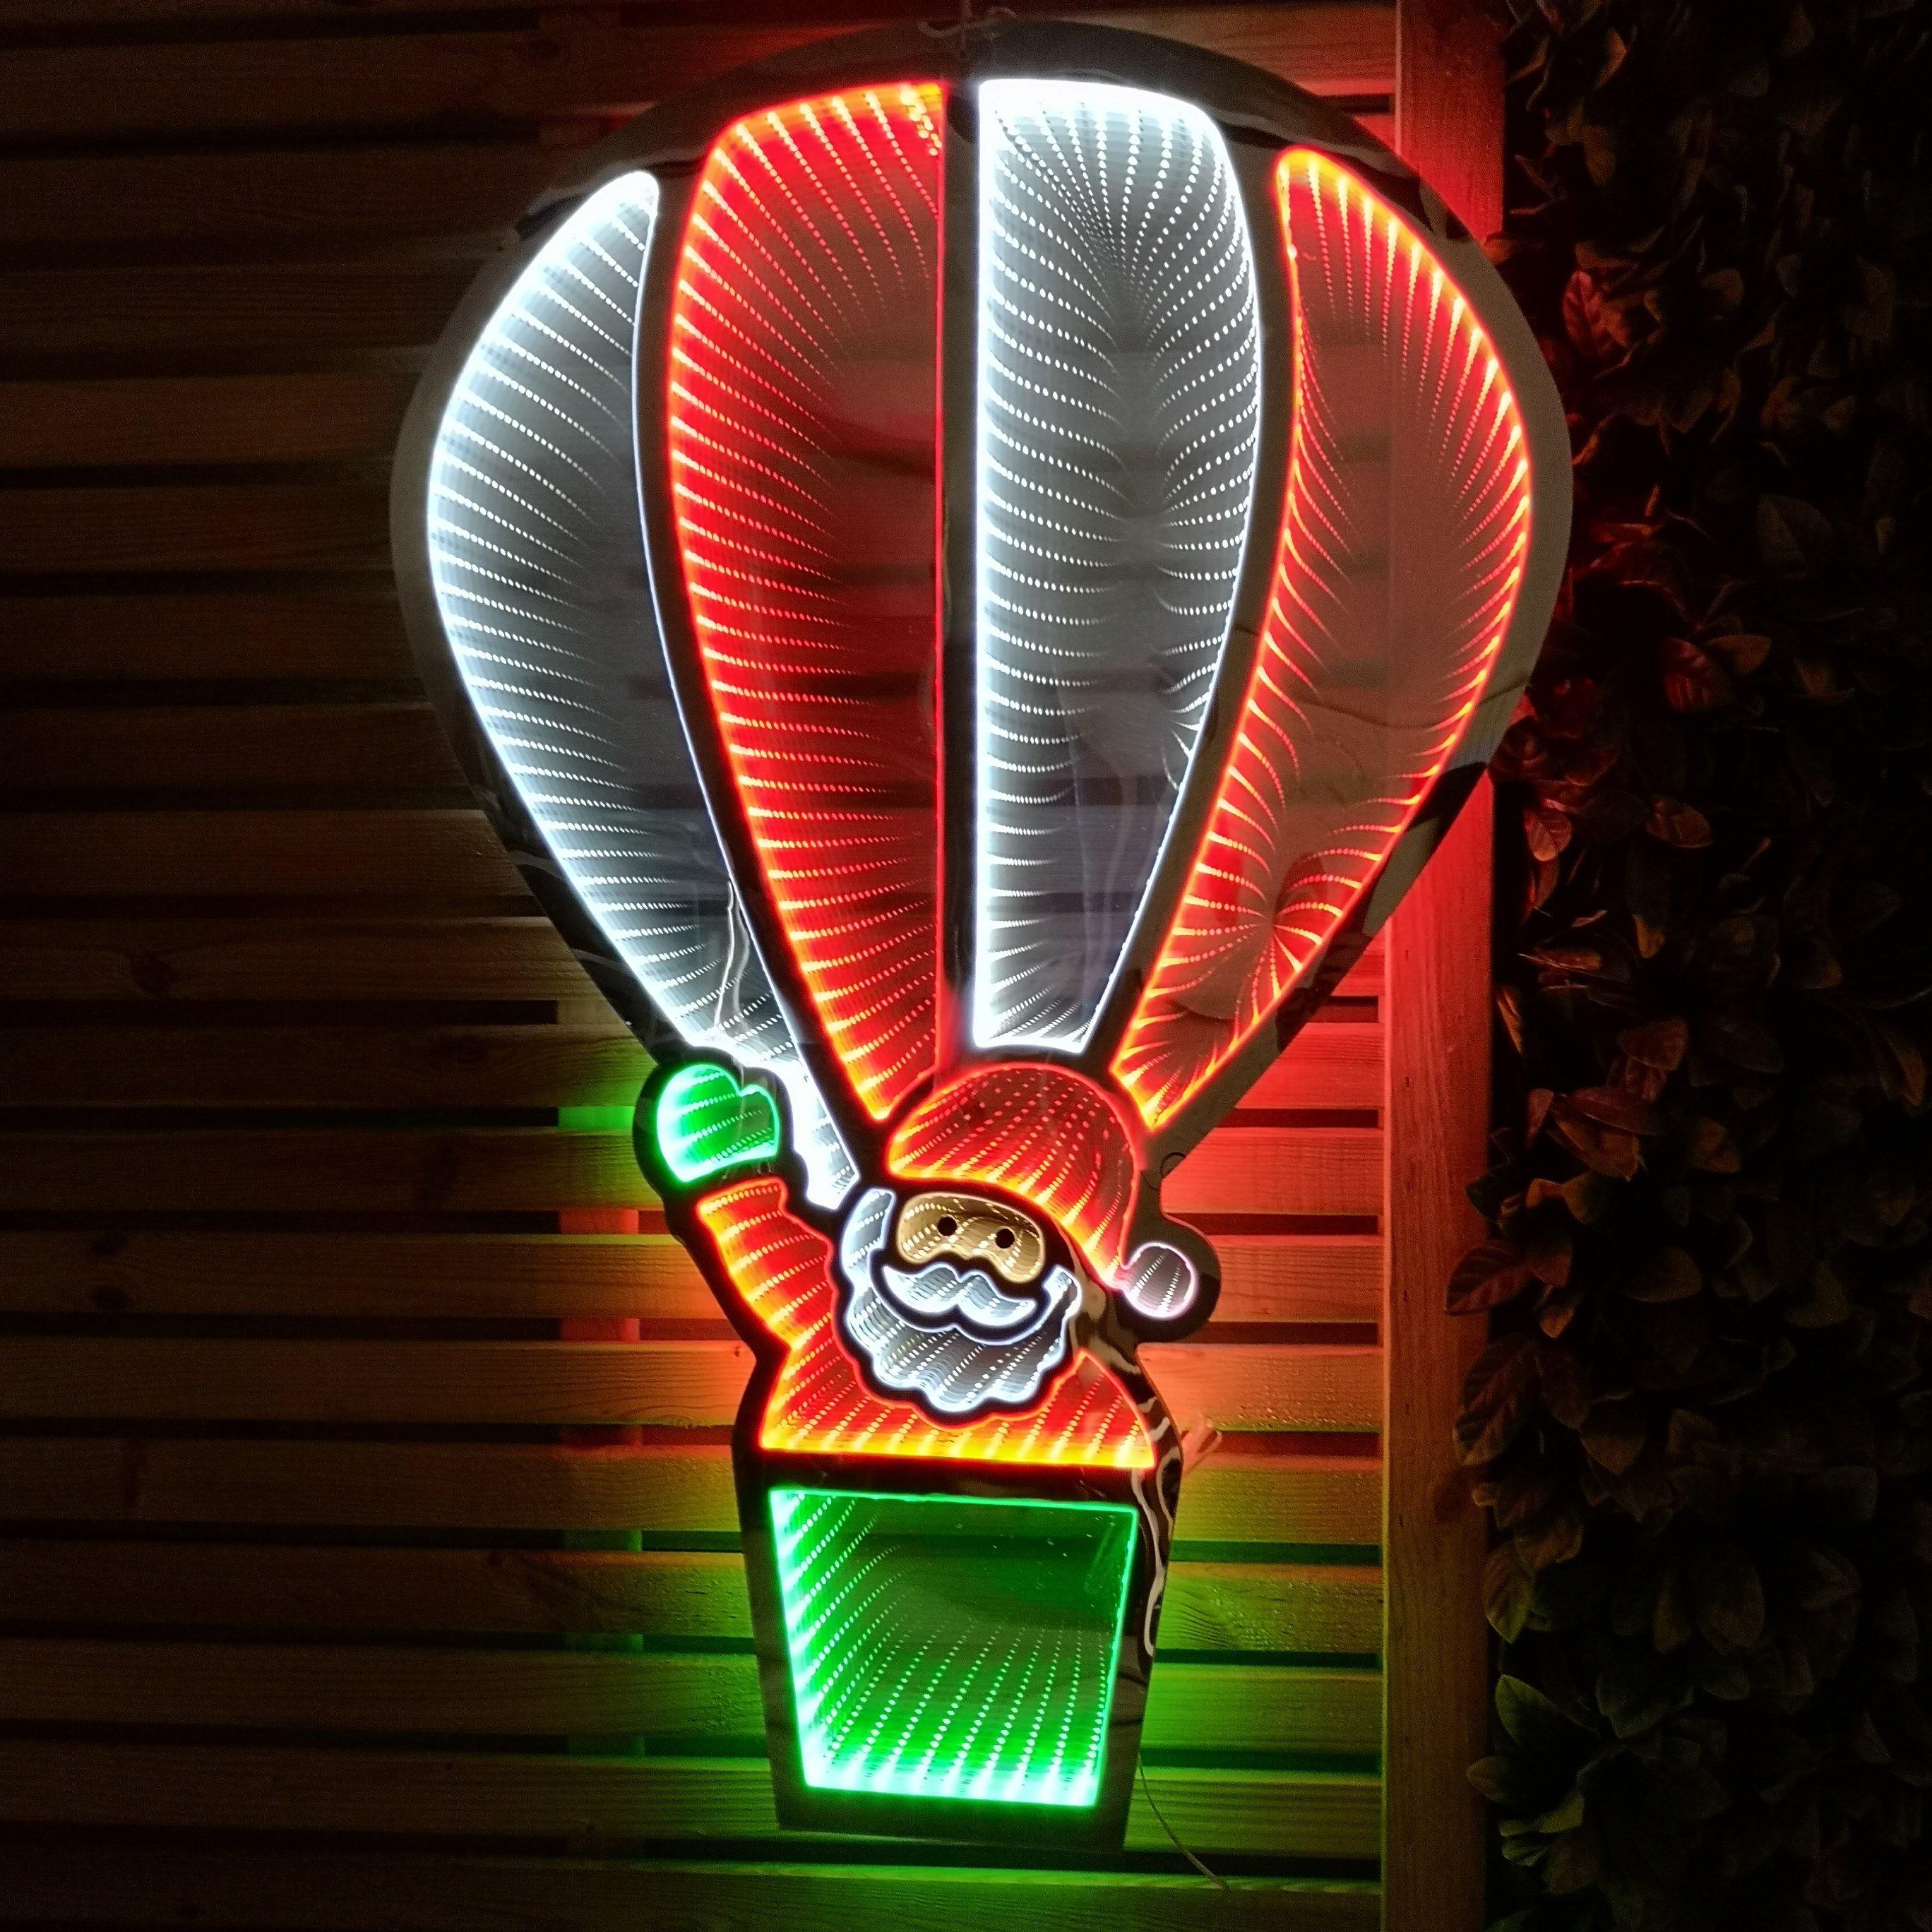 89cm LED Infinity Christmas Light Hanging Hot Air Balloon with Santa Decoration